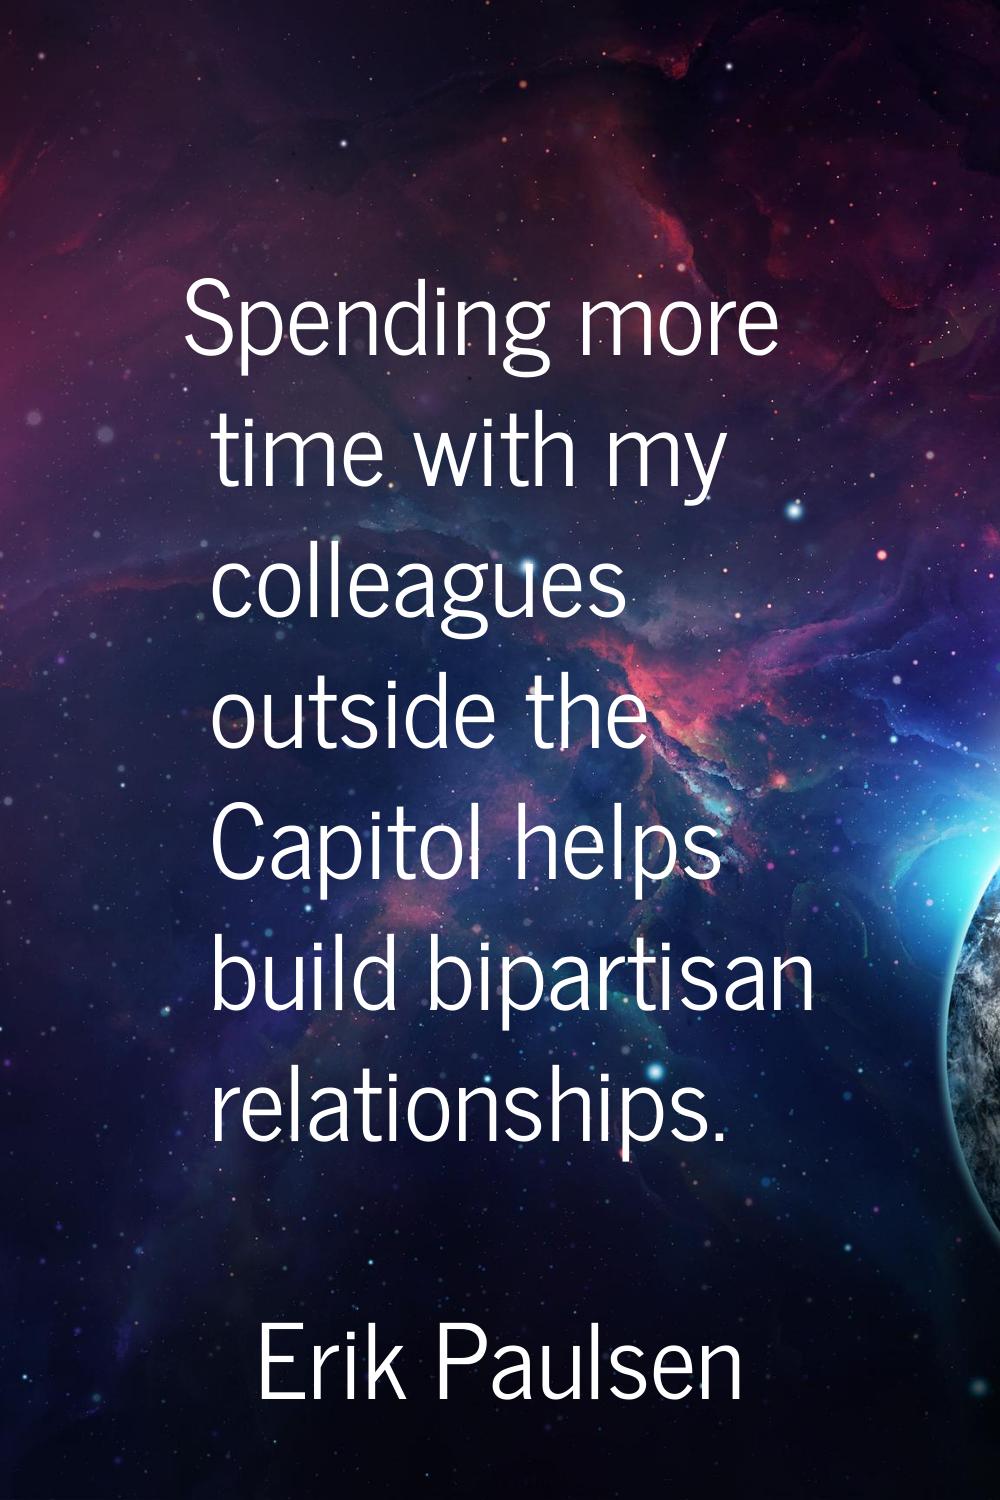 Spending more time with my colleagues outside the Capitol helps build bipartisan relationships.